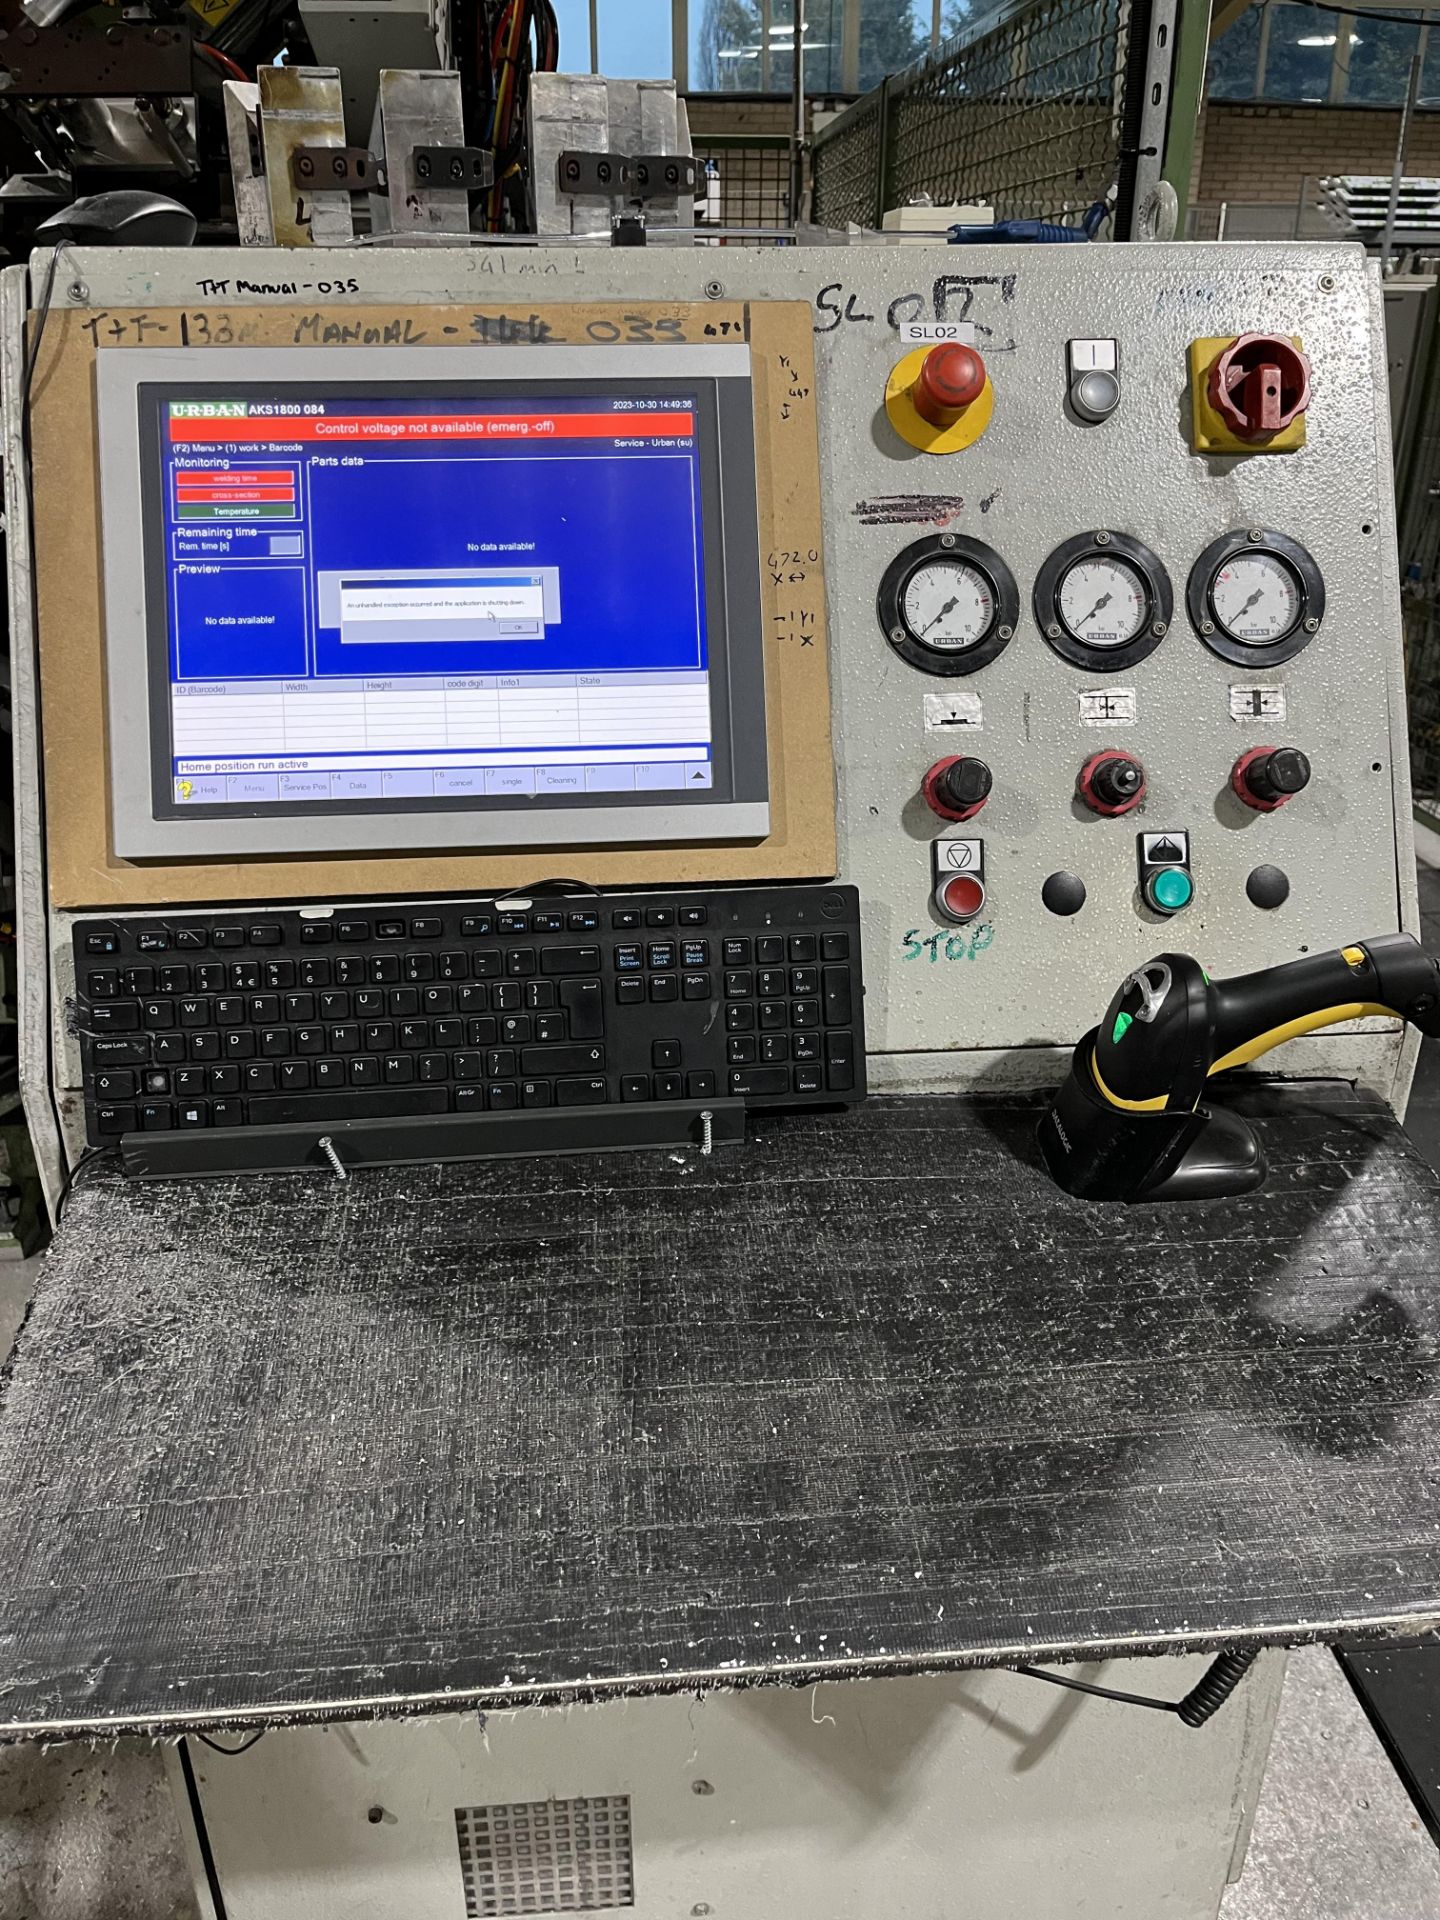 SLO2 Urban AKS 1805T -25/16 CNC Vertical Quad Welder Serial No. 180084 (2008) with Control Panel, Ur - Image 2 of 2